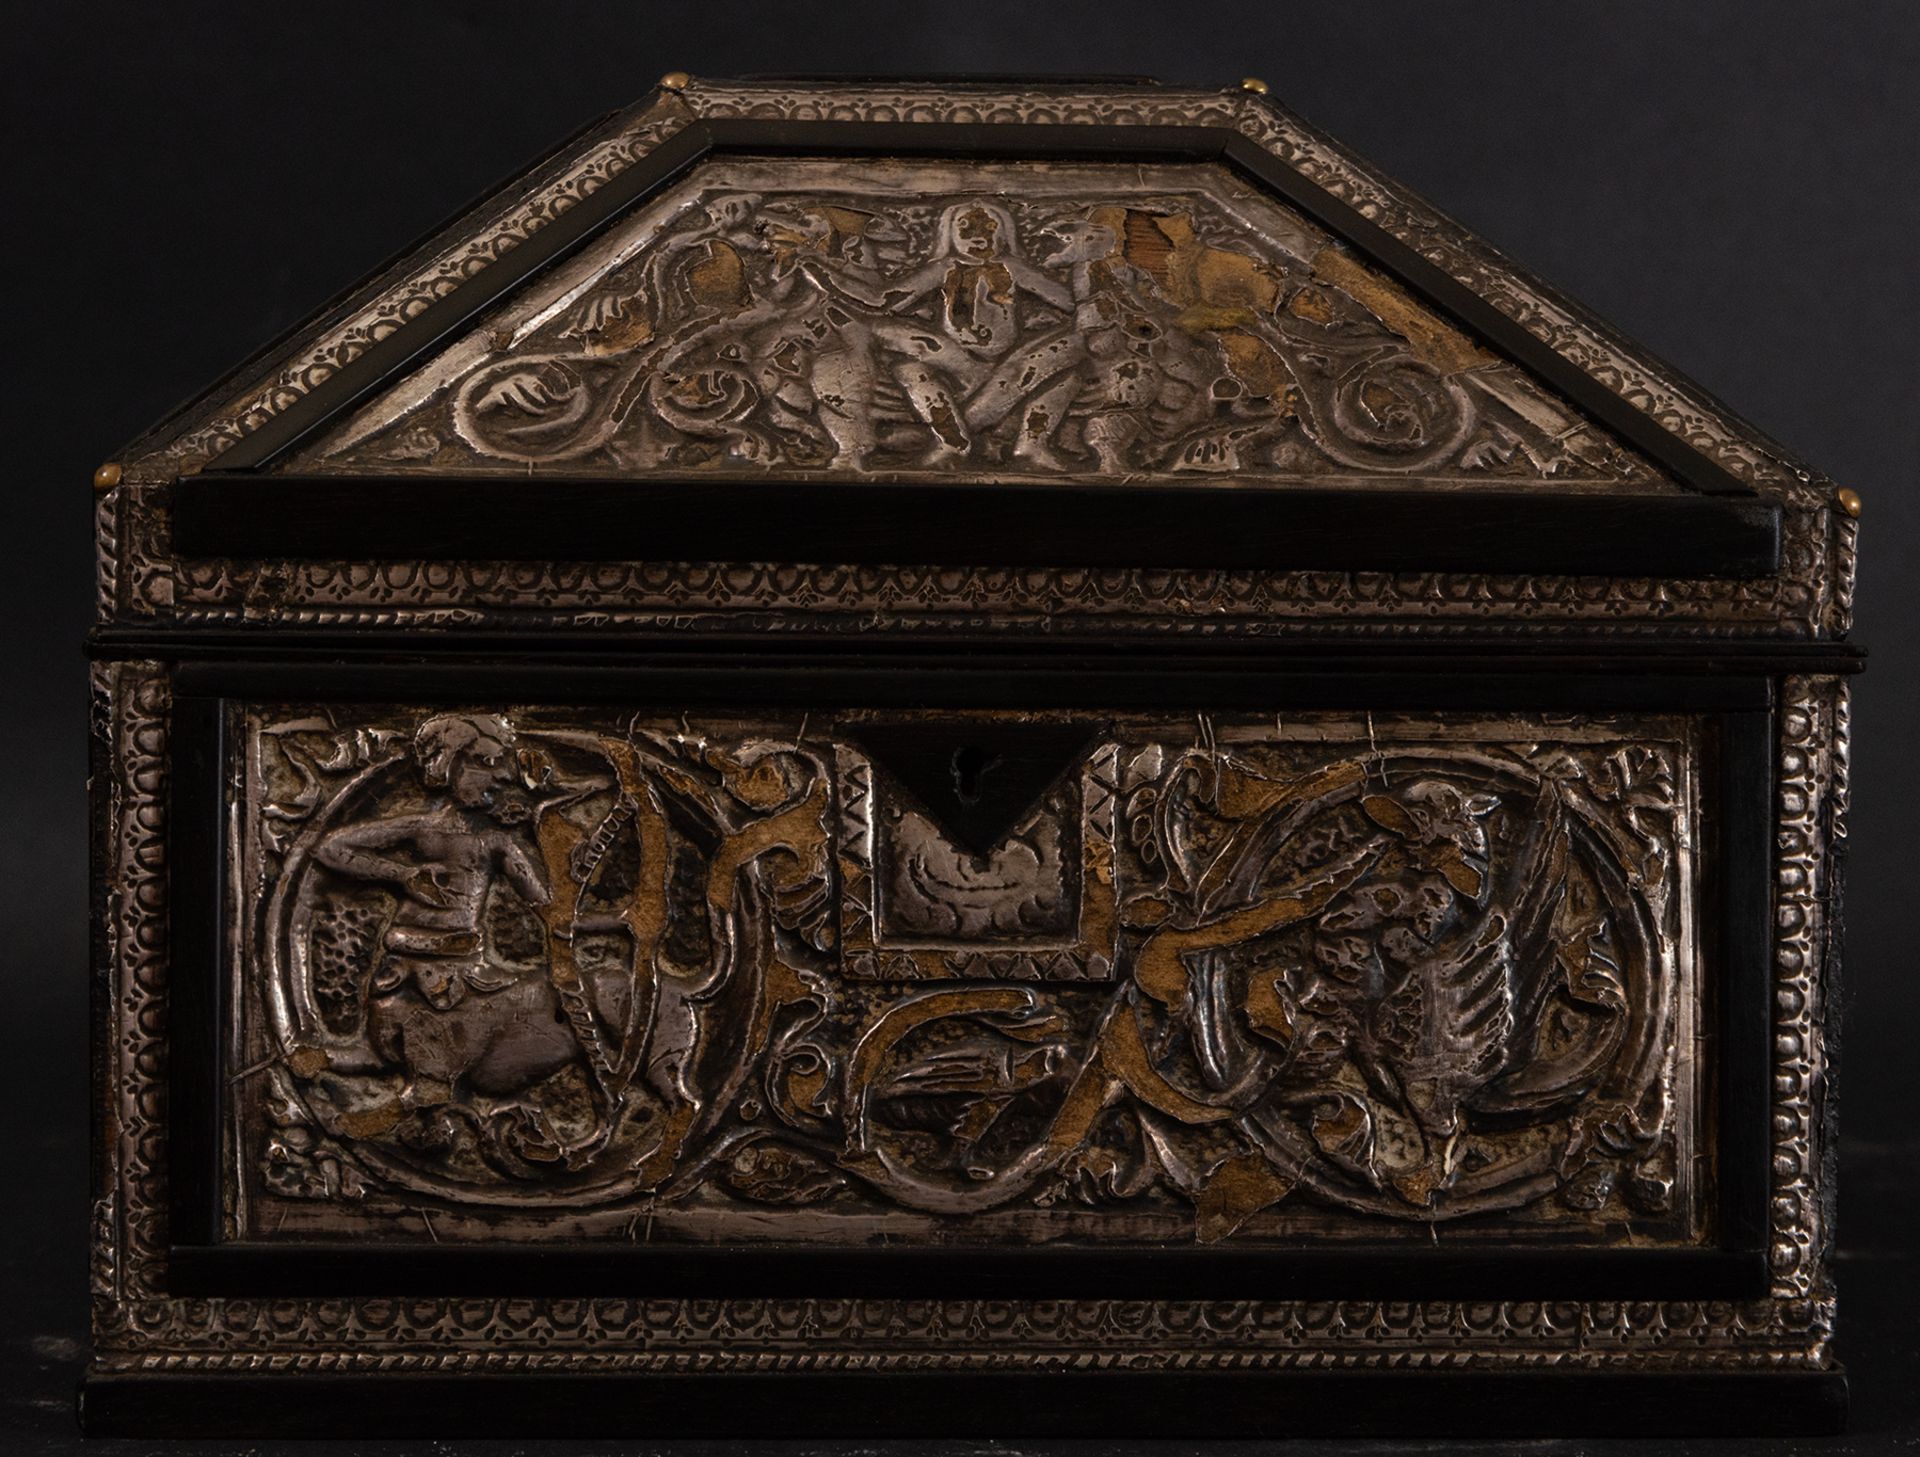 Italian Renaissance chest in embossed silver and ebony marquetry